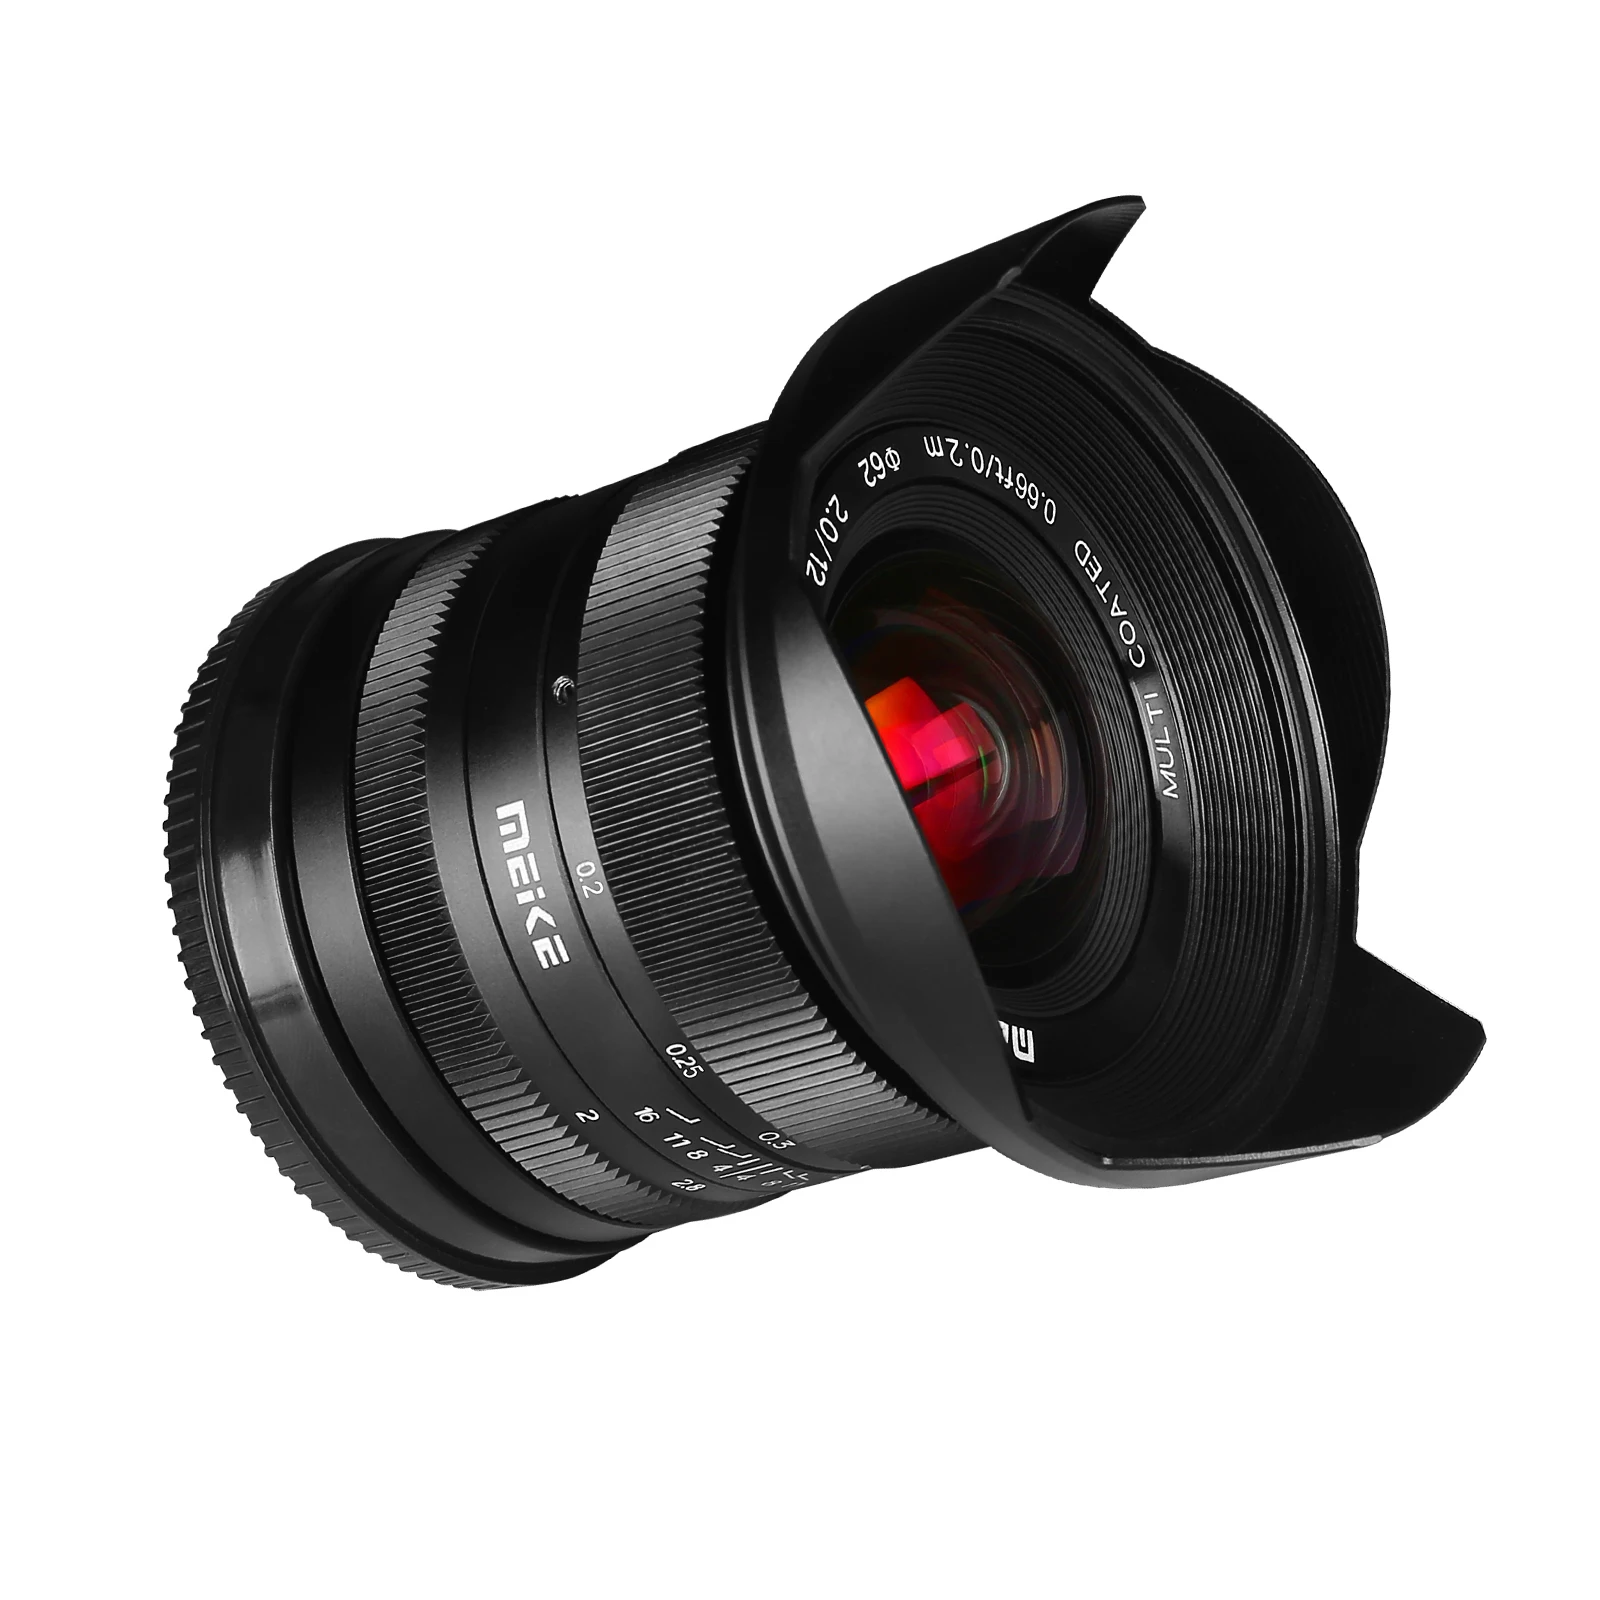 

Meike 12mm F2.0 Aps-C Manual Focus Wide Angle Lens Compatible With Sony E/Fuji X/M43/Canon RF/Nikon Z Mount Camera